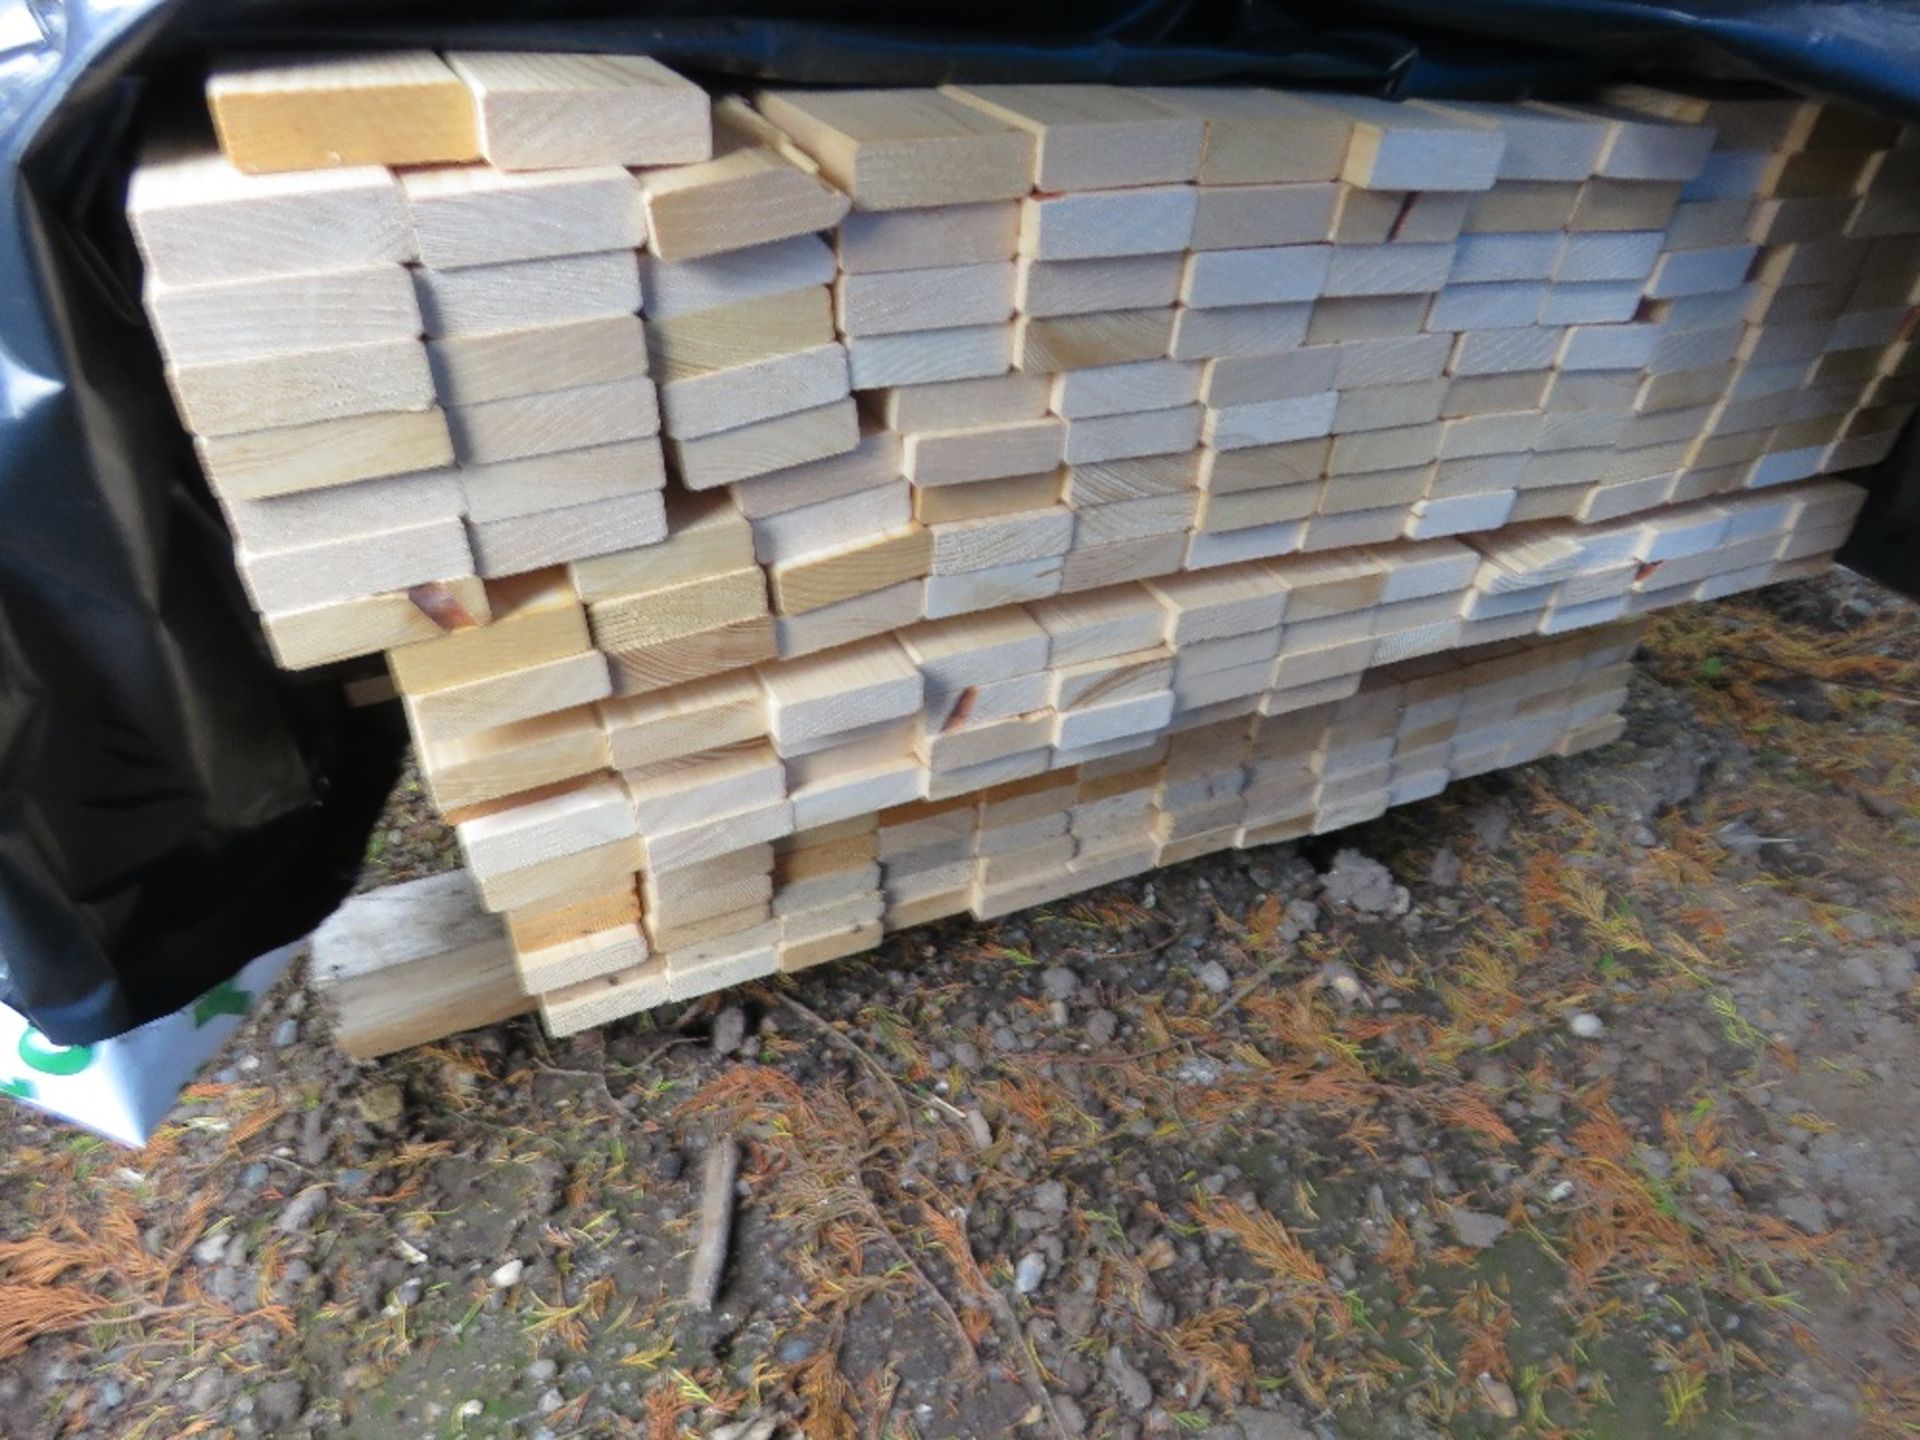 PACK OF TIMBER SLATS/BOARDS 1.8M LENGTH X 70MM WIDTH APPROX. - Image 2 of 4